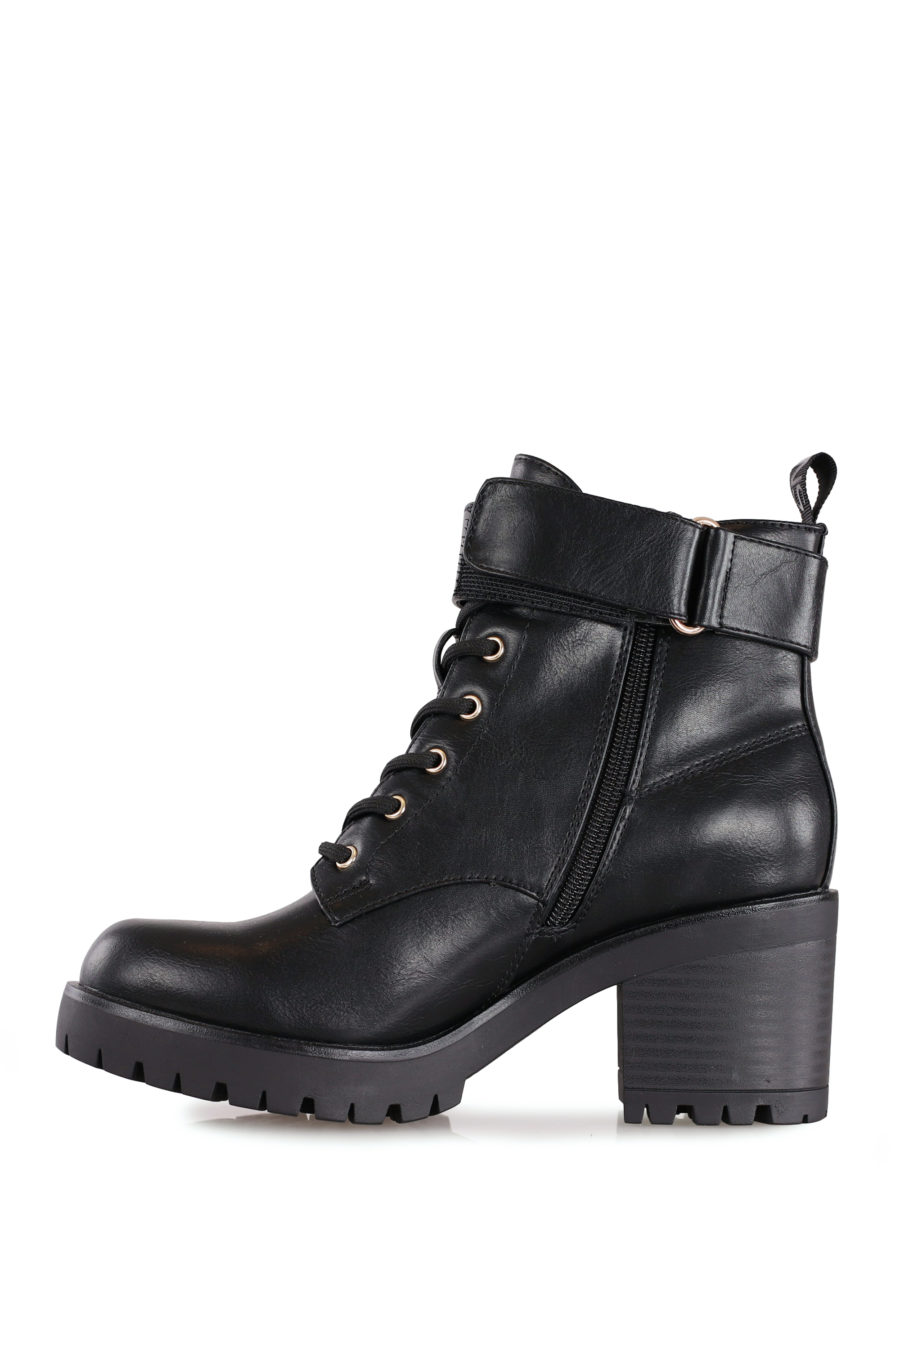 Black ankle boots with gold logo - IMG 8257 copy